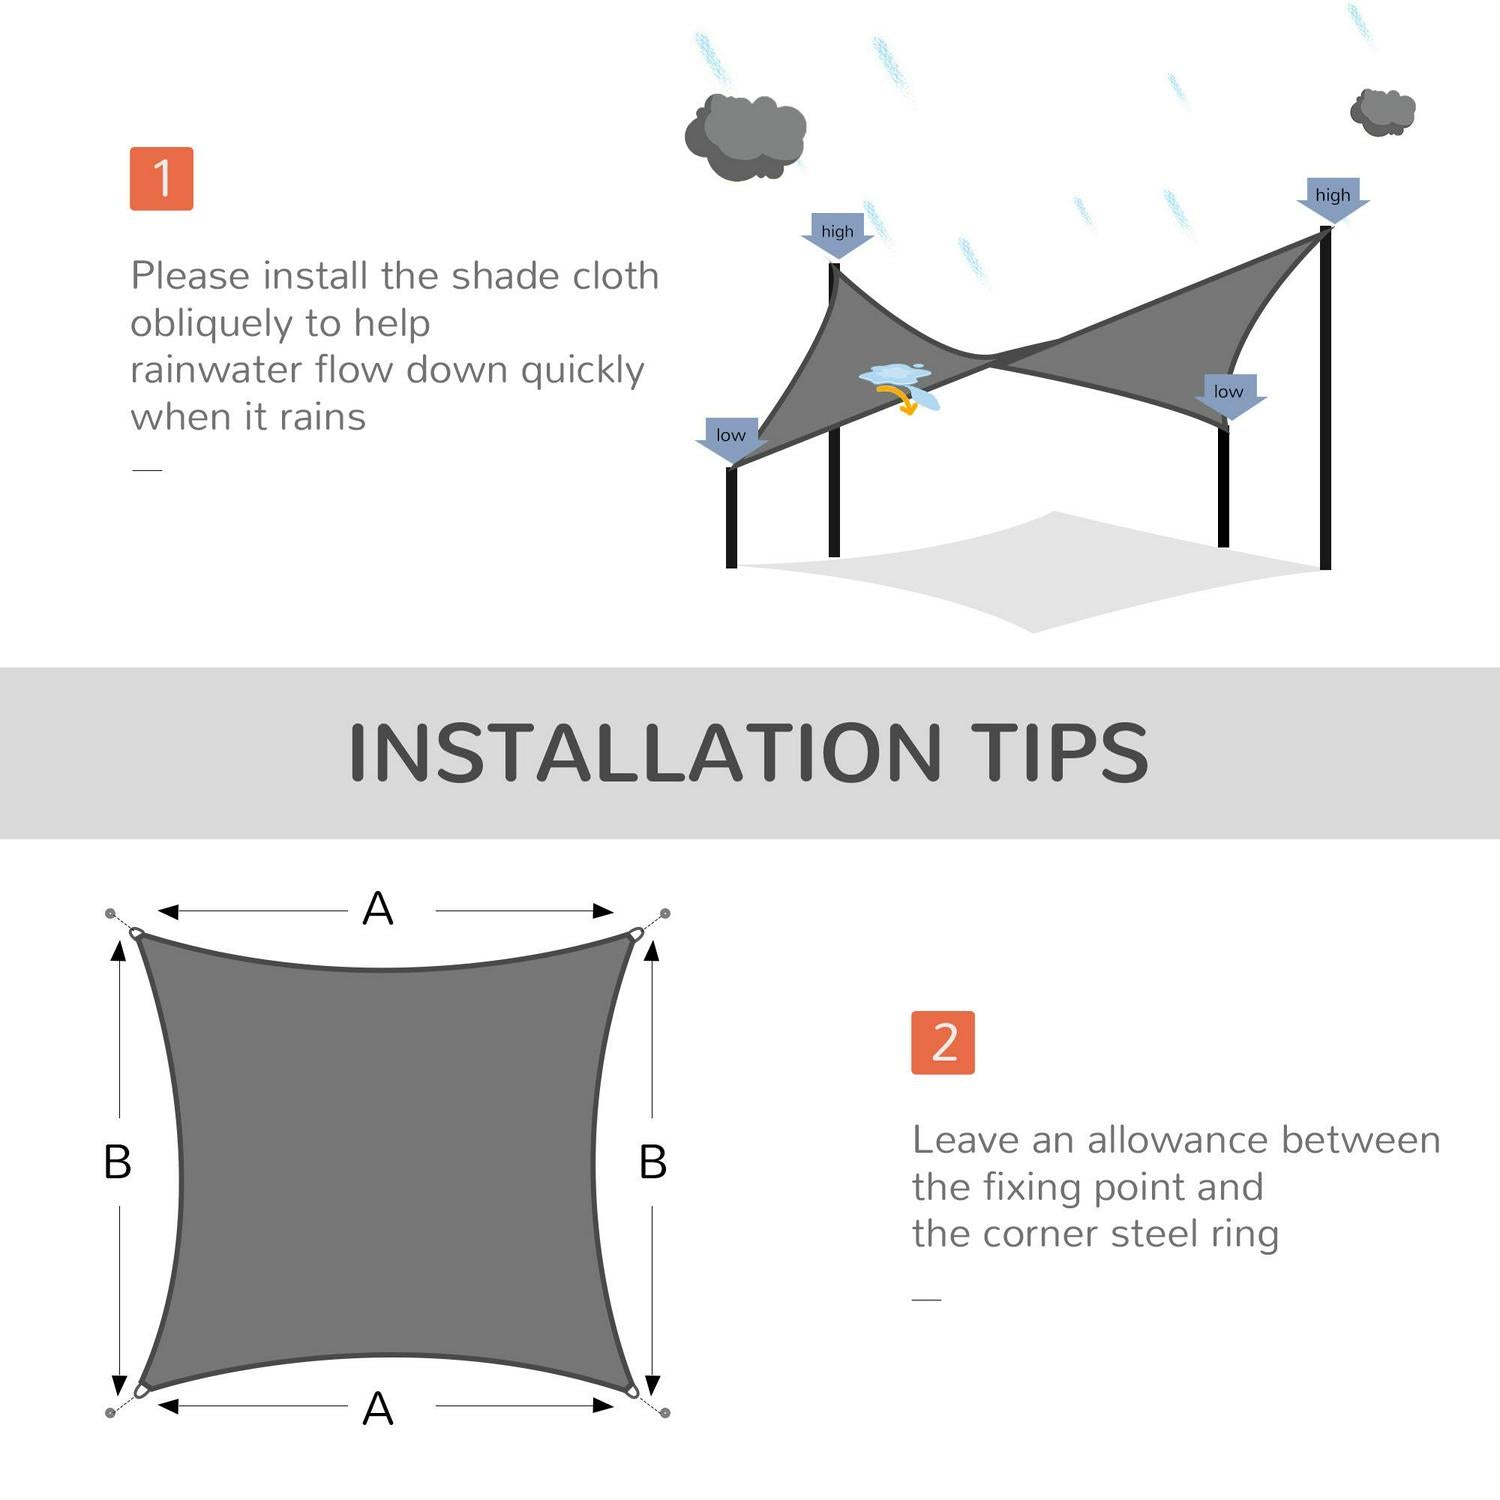 Shade Sail Rectangle Canopy Outdoor Sunscreen Awning - Charcoal Grey